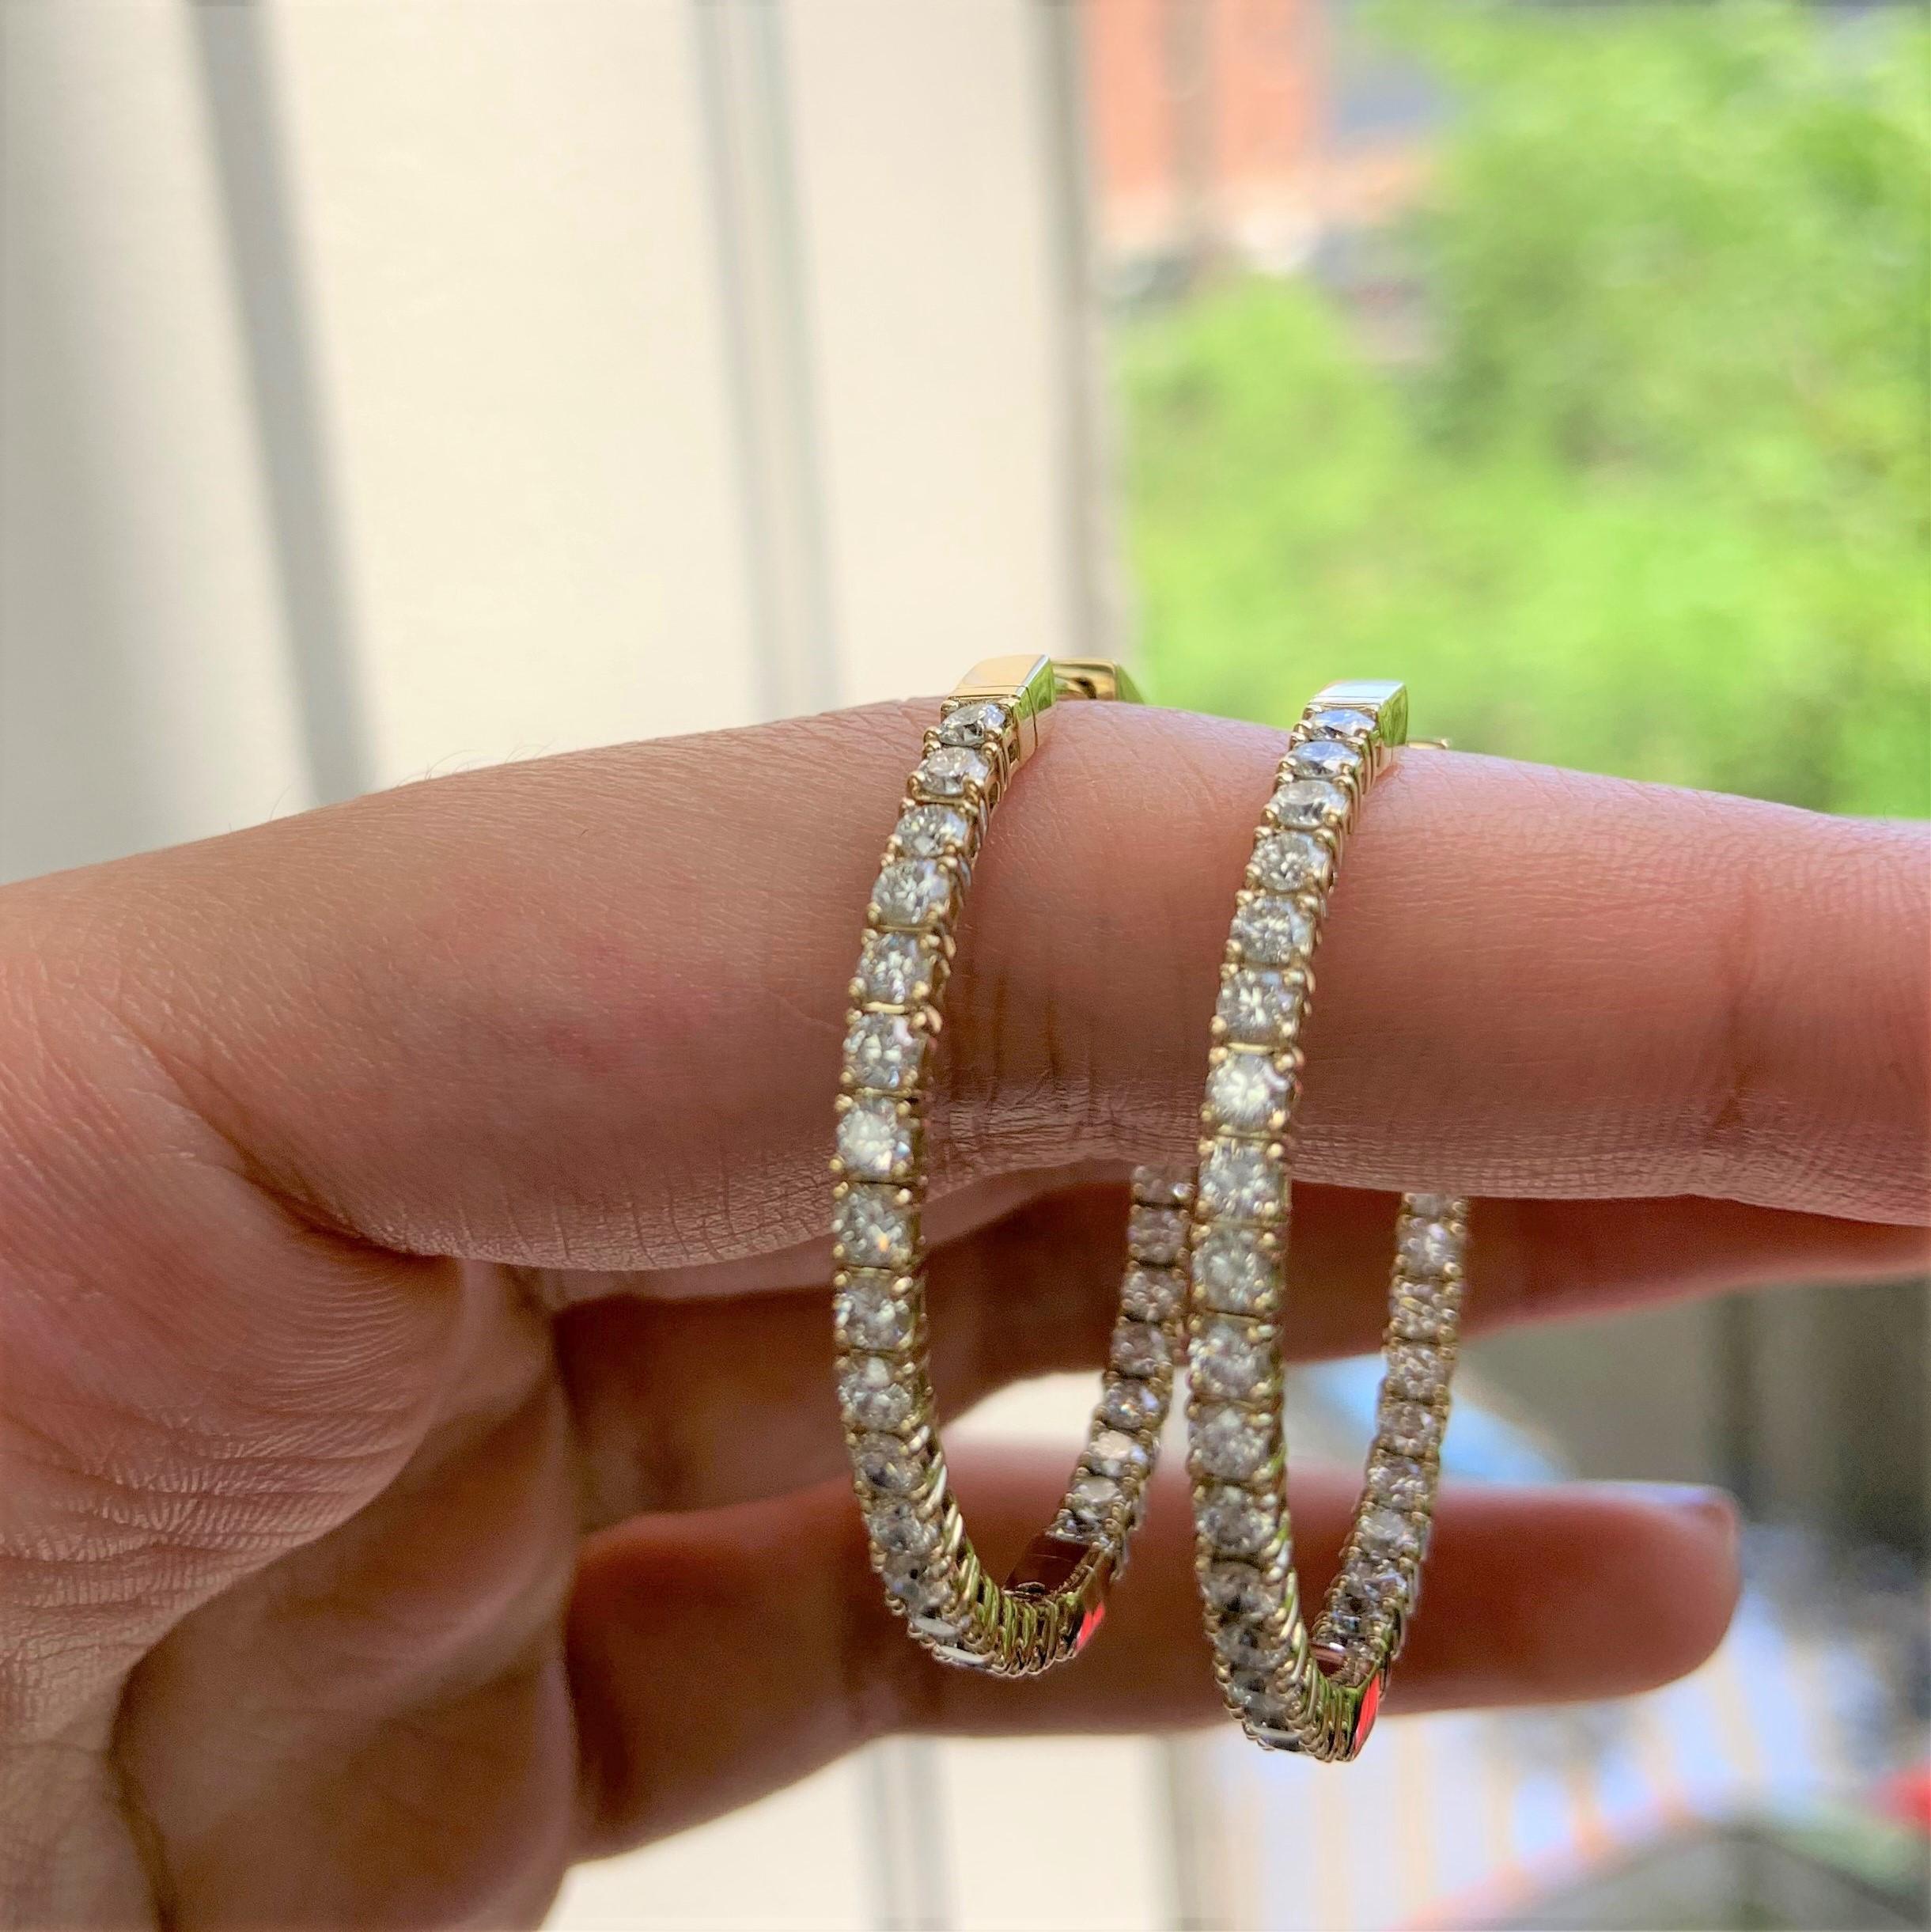 These Classic and Elegant Diamond Oval Hoop Earrings will frame your face beautifully! Crafted of 14K Yellow Gold these earrings feature approximately 2.77cts of Natural Round Diamonds. Diamond Color and Clarity is GH-SI1. Insert Latch for